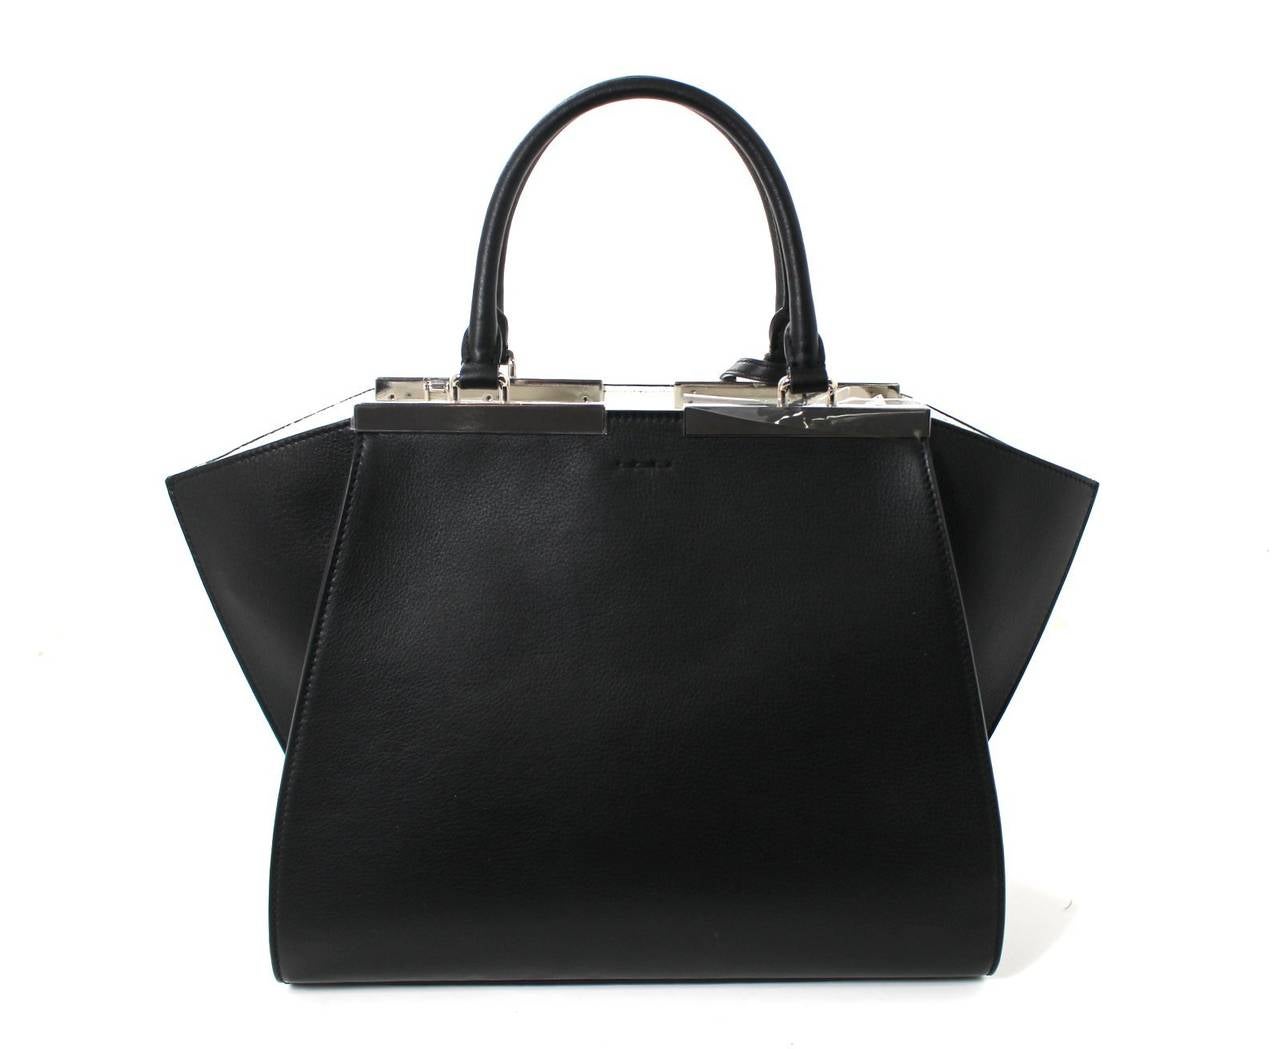 PRISTINE condition, Never Carried- FENDI TroisJours Shopper in Black Calfskin with White interior
Fendi card, care booklet, clochette with mirror, optional strap and Fendi dust bag included.
Current style retailing for over $2,650.00 with taxes. 